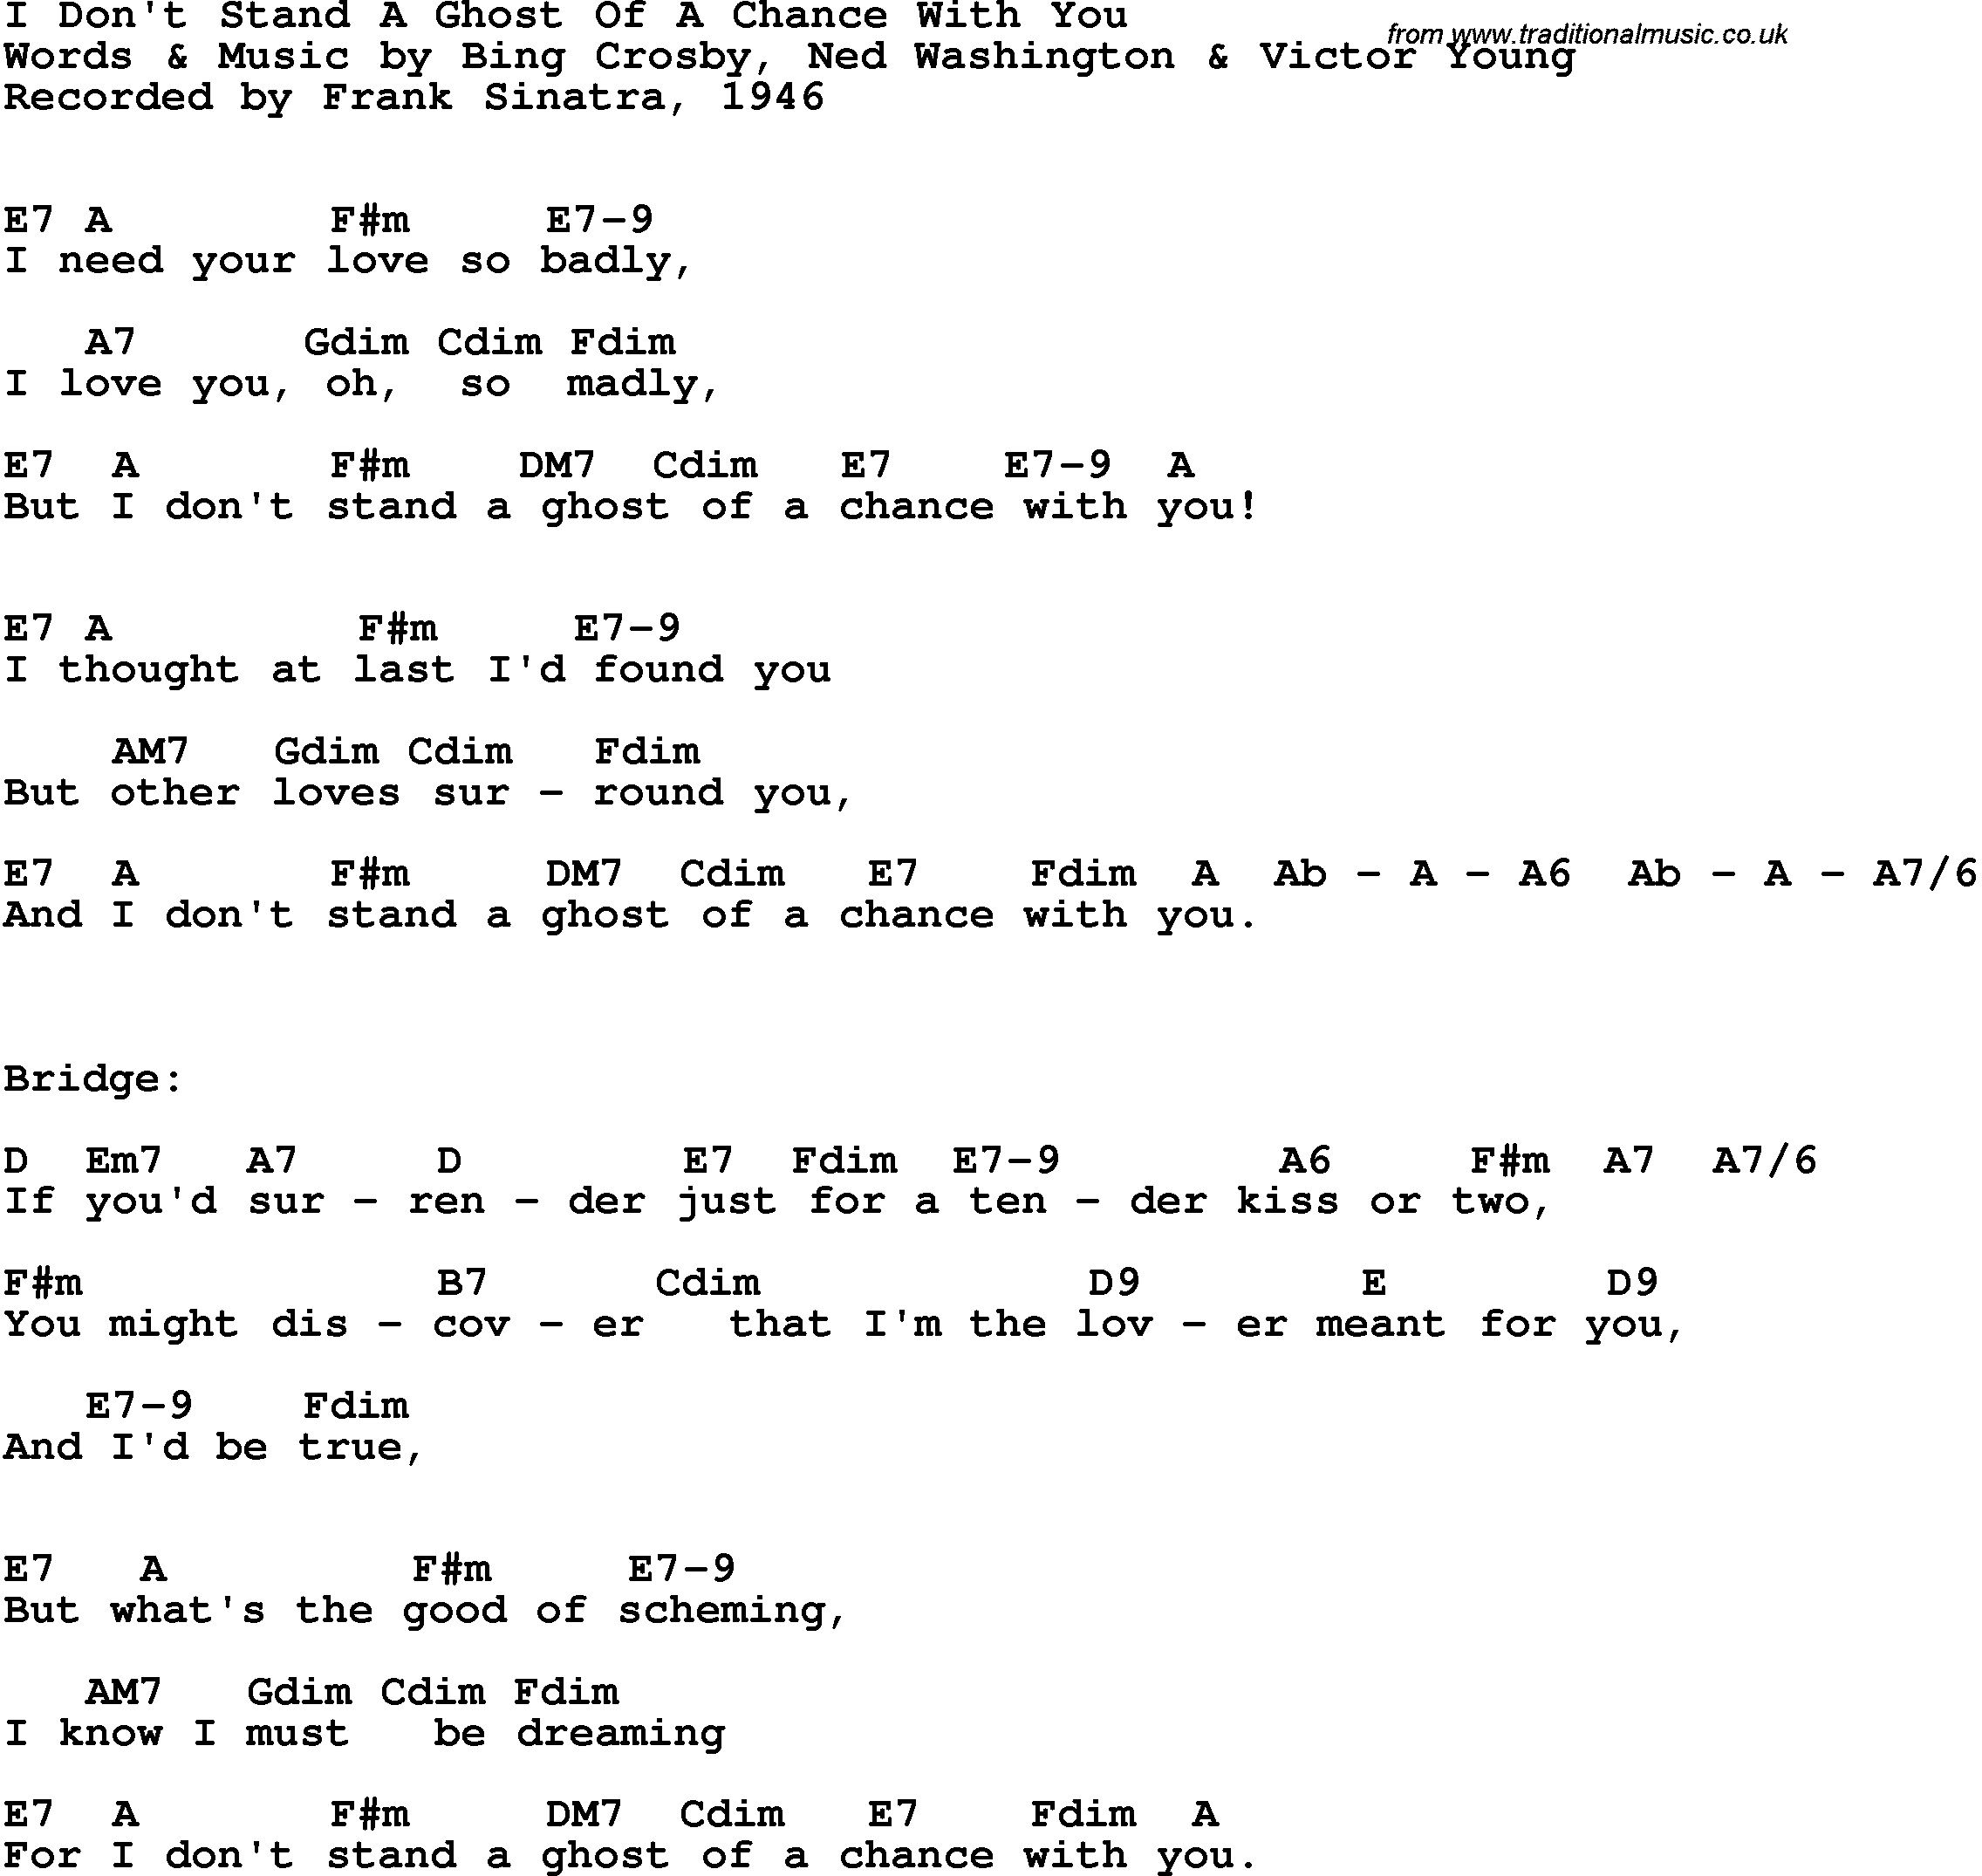 Song Lyrics with guitar chords for I Don't Stand A Ghost Of A Chance With You - Frank Sinatra, 1946